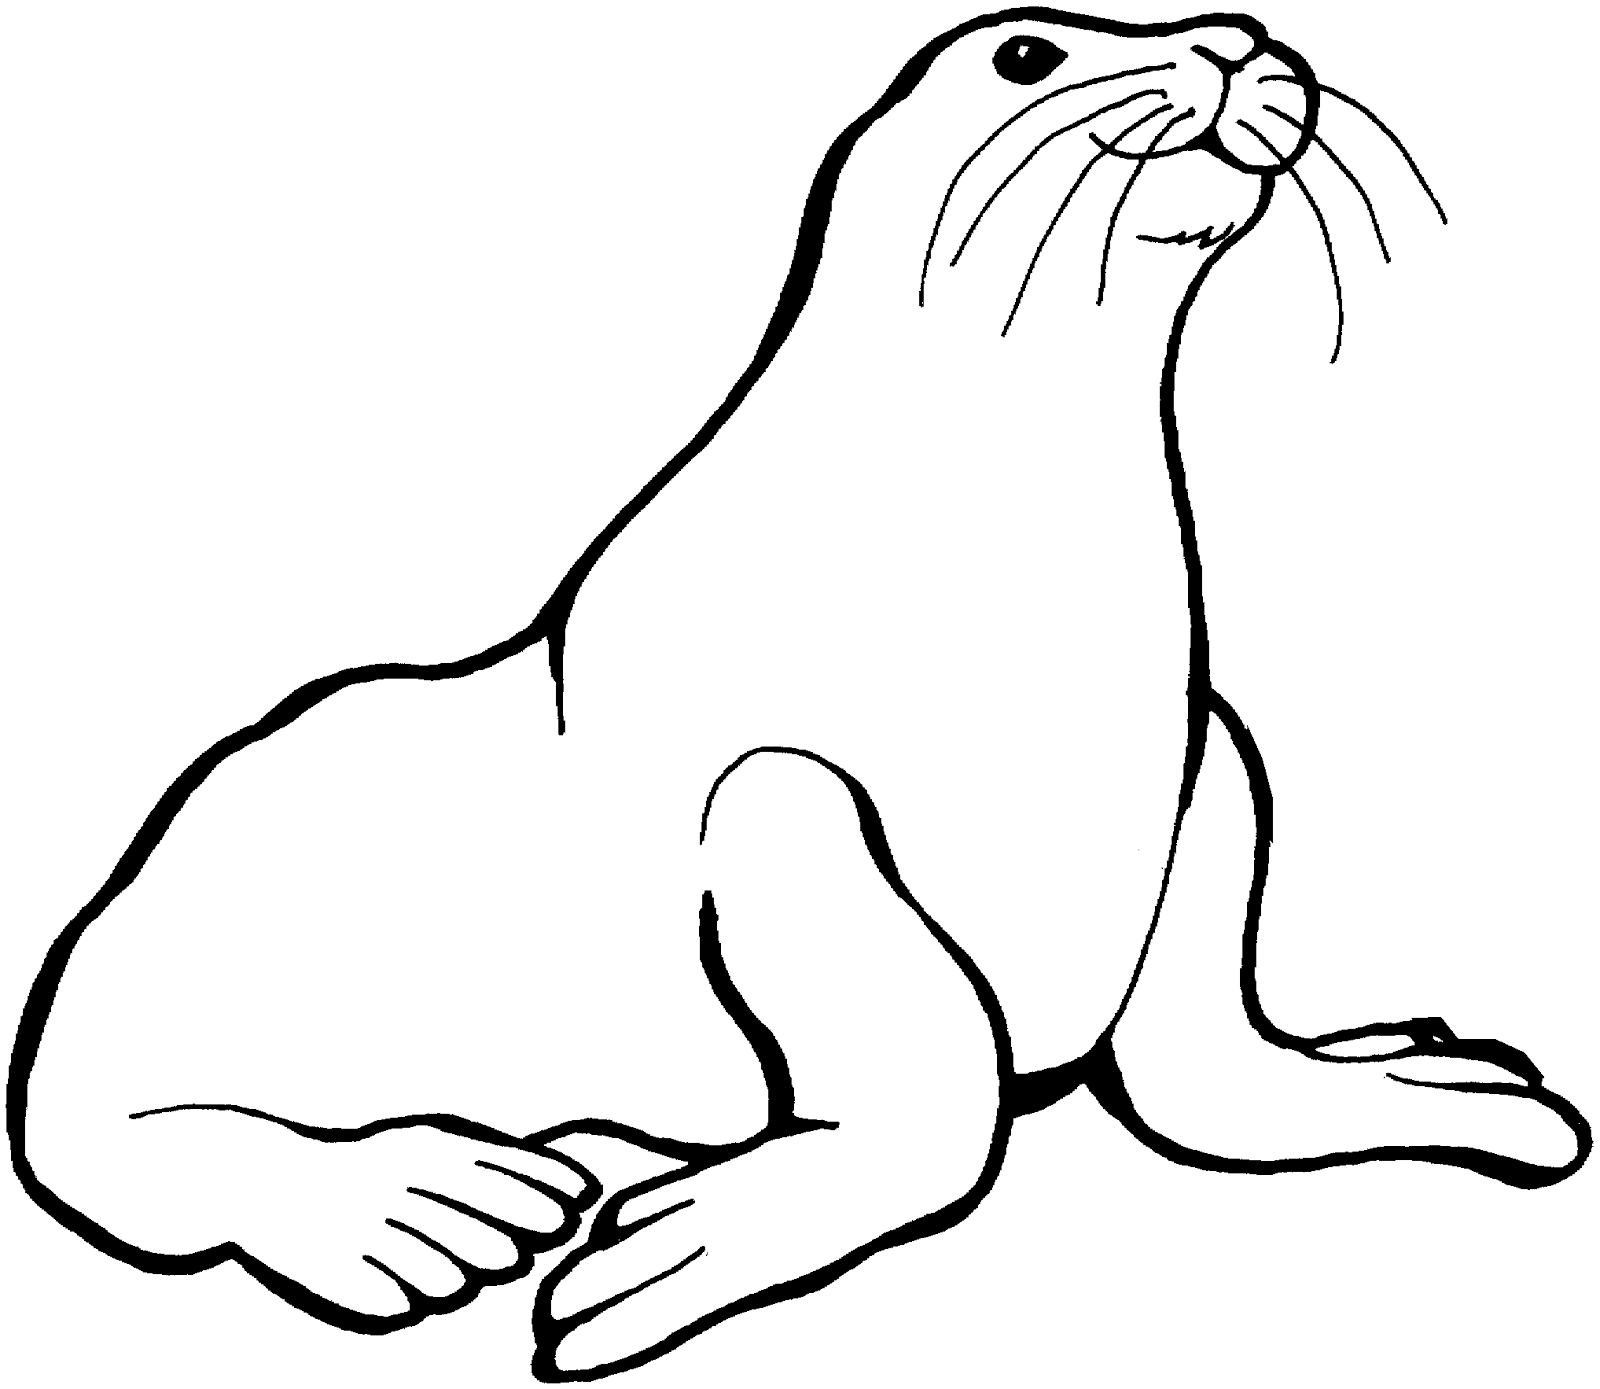 Coloring Picture Of Animals For Kids: Sea Lions Coloring Pages Kids